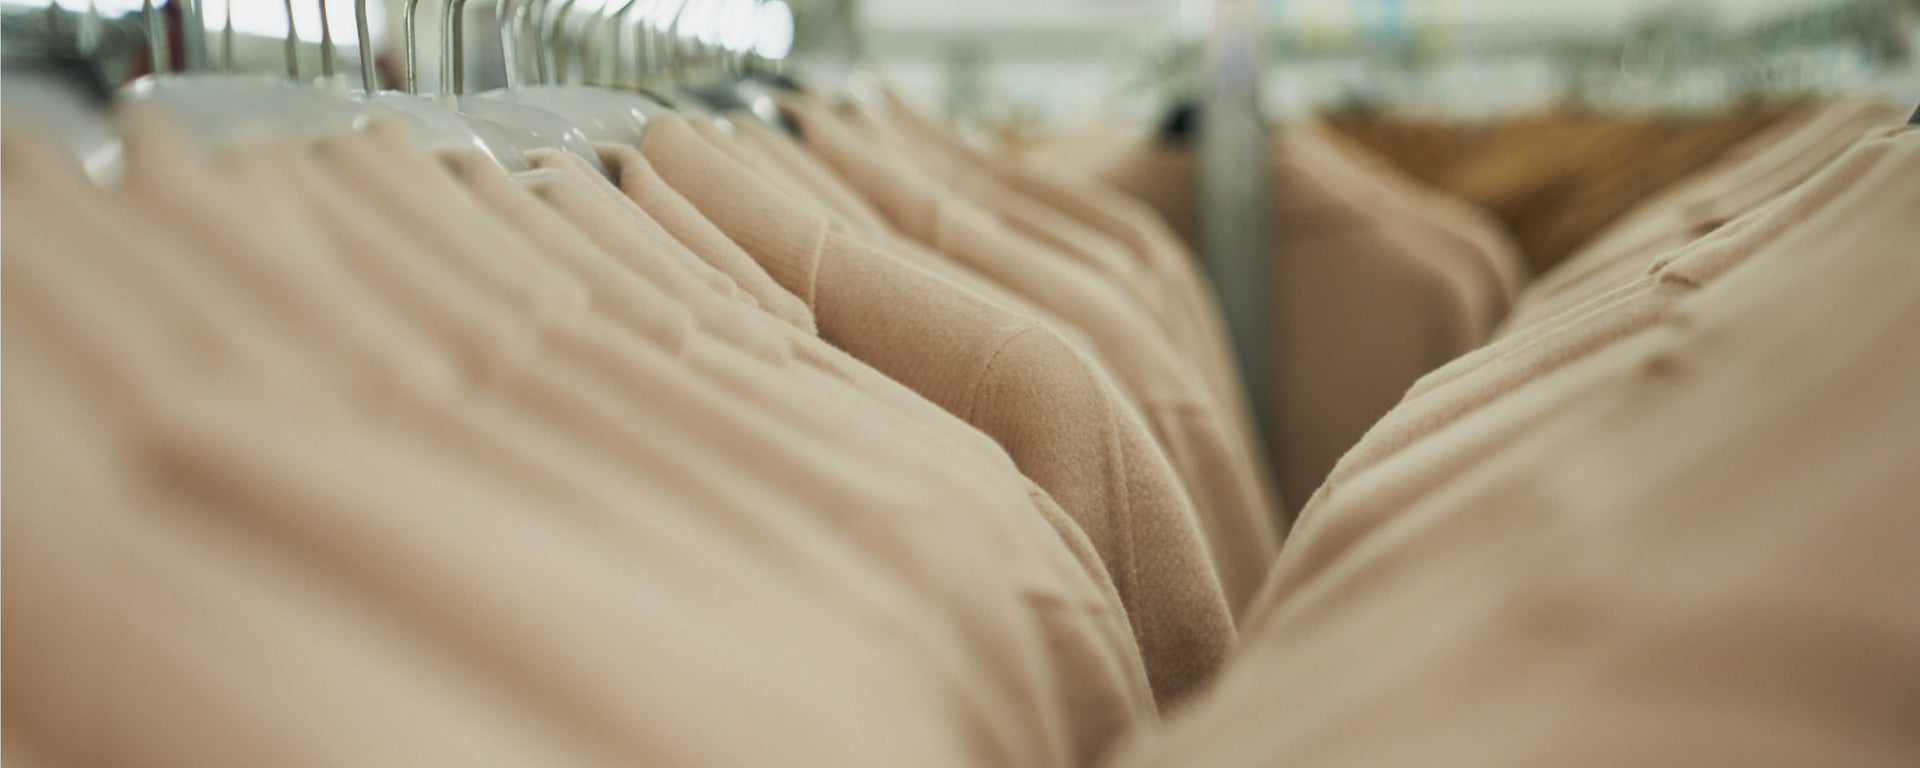 In an effort to provide customers with the best possible quality and value, we continuously strive to offer considered products, made from high-quality fabrics at attainable prices.